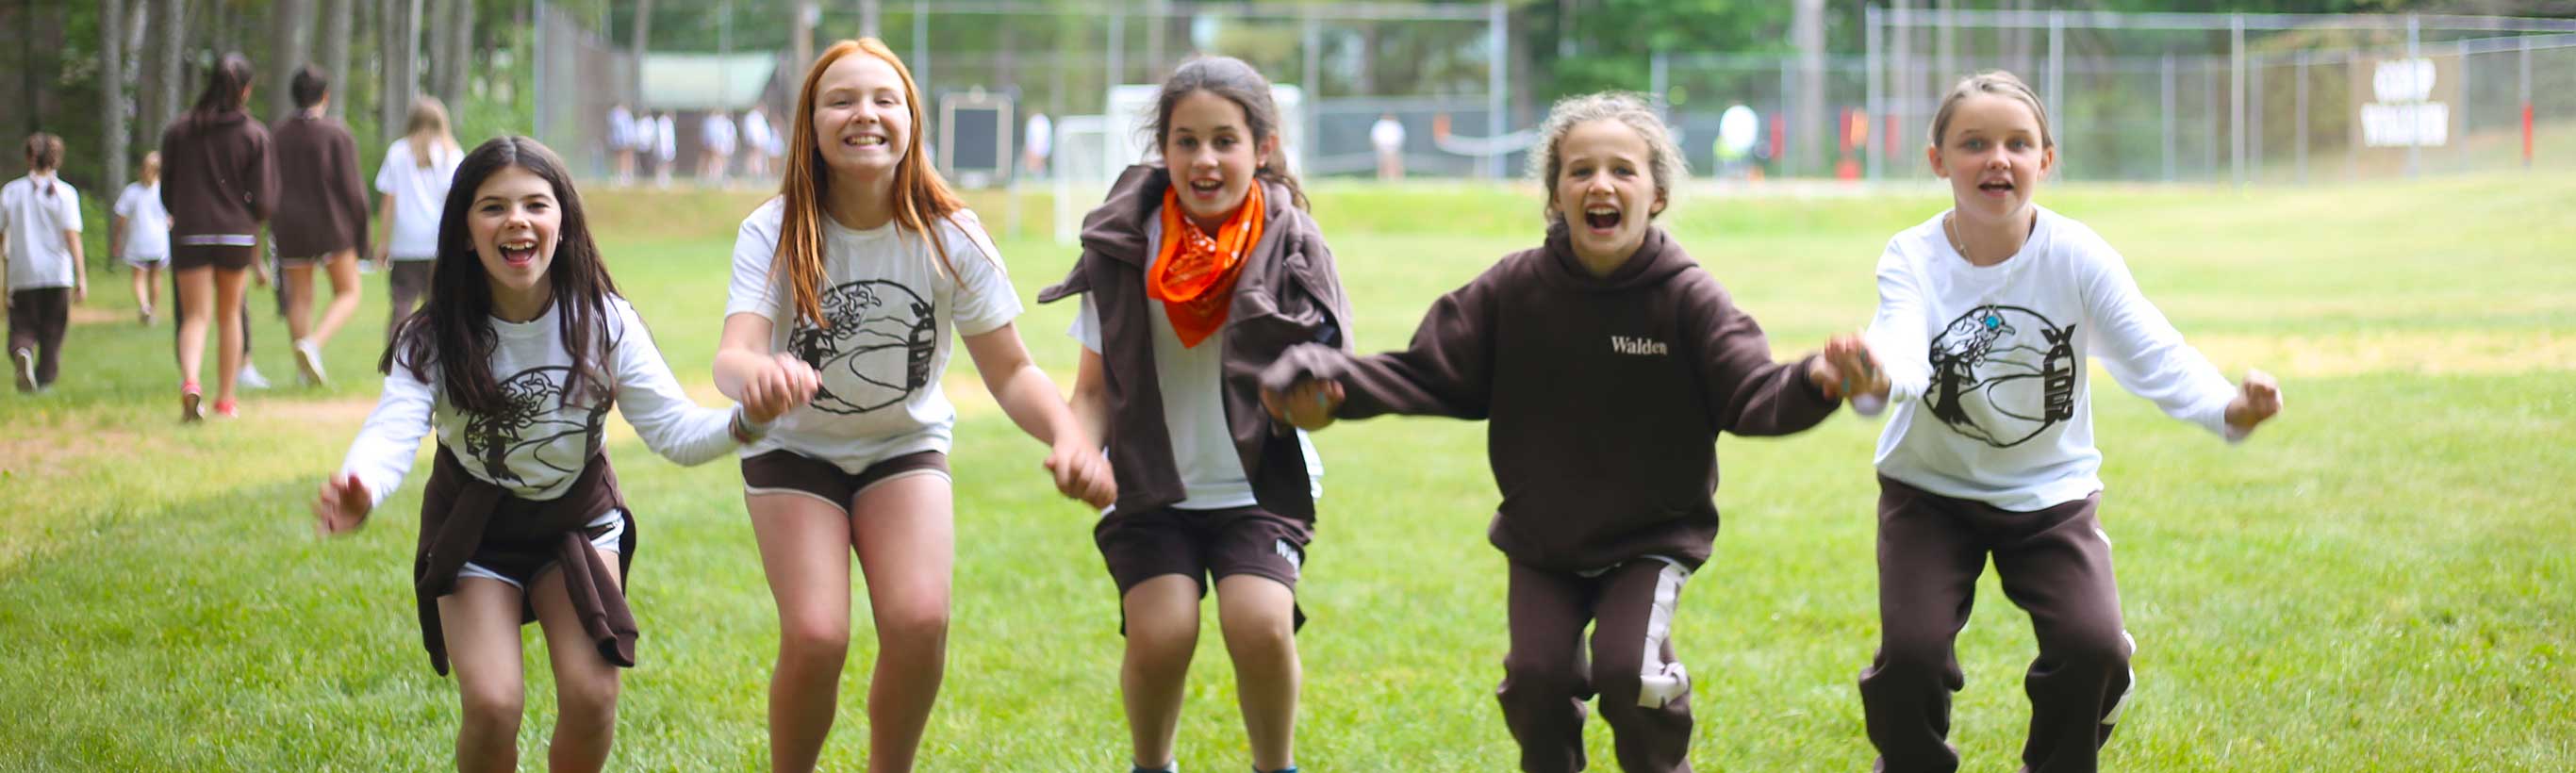 Young girls hold hands and jump in excitement at camp.